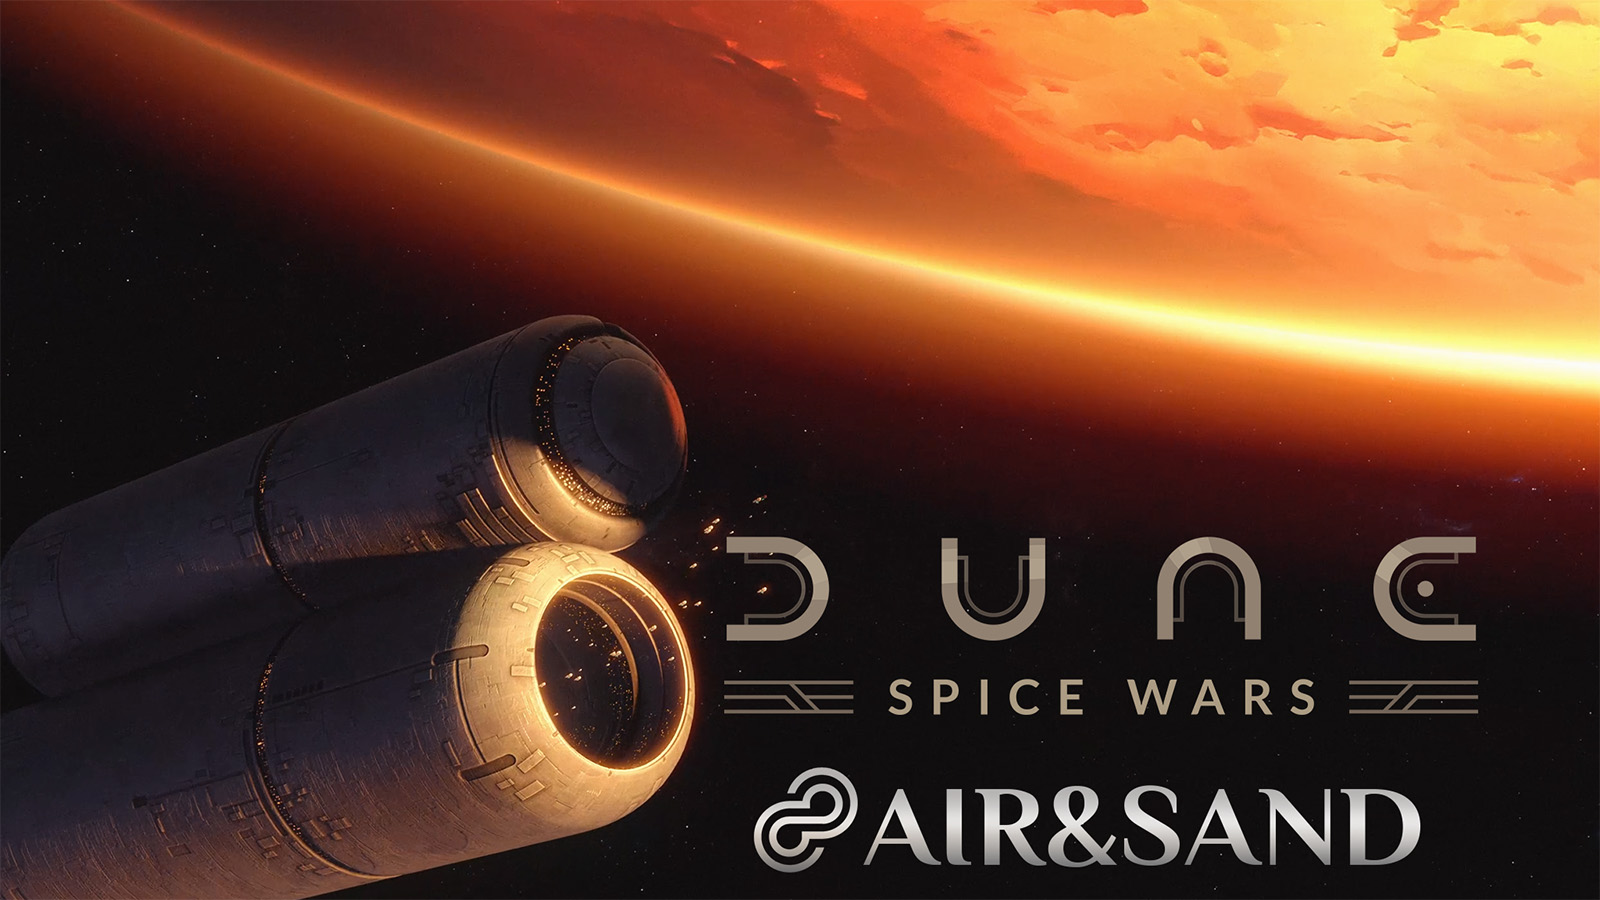 Dune: Spice Wars Gets Air & Sand Update, Launches On PC Game Pass